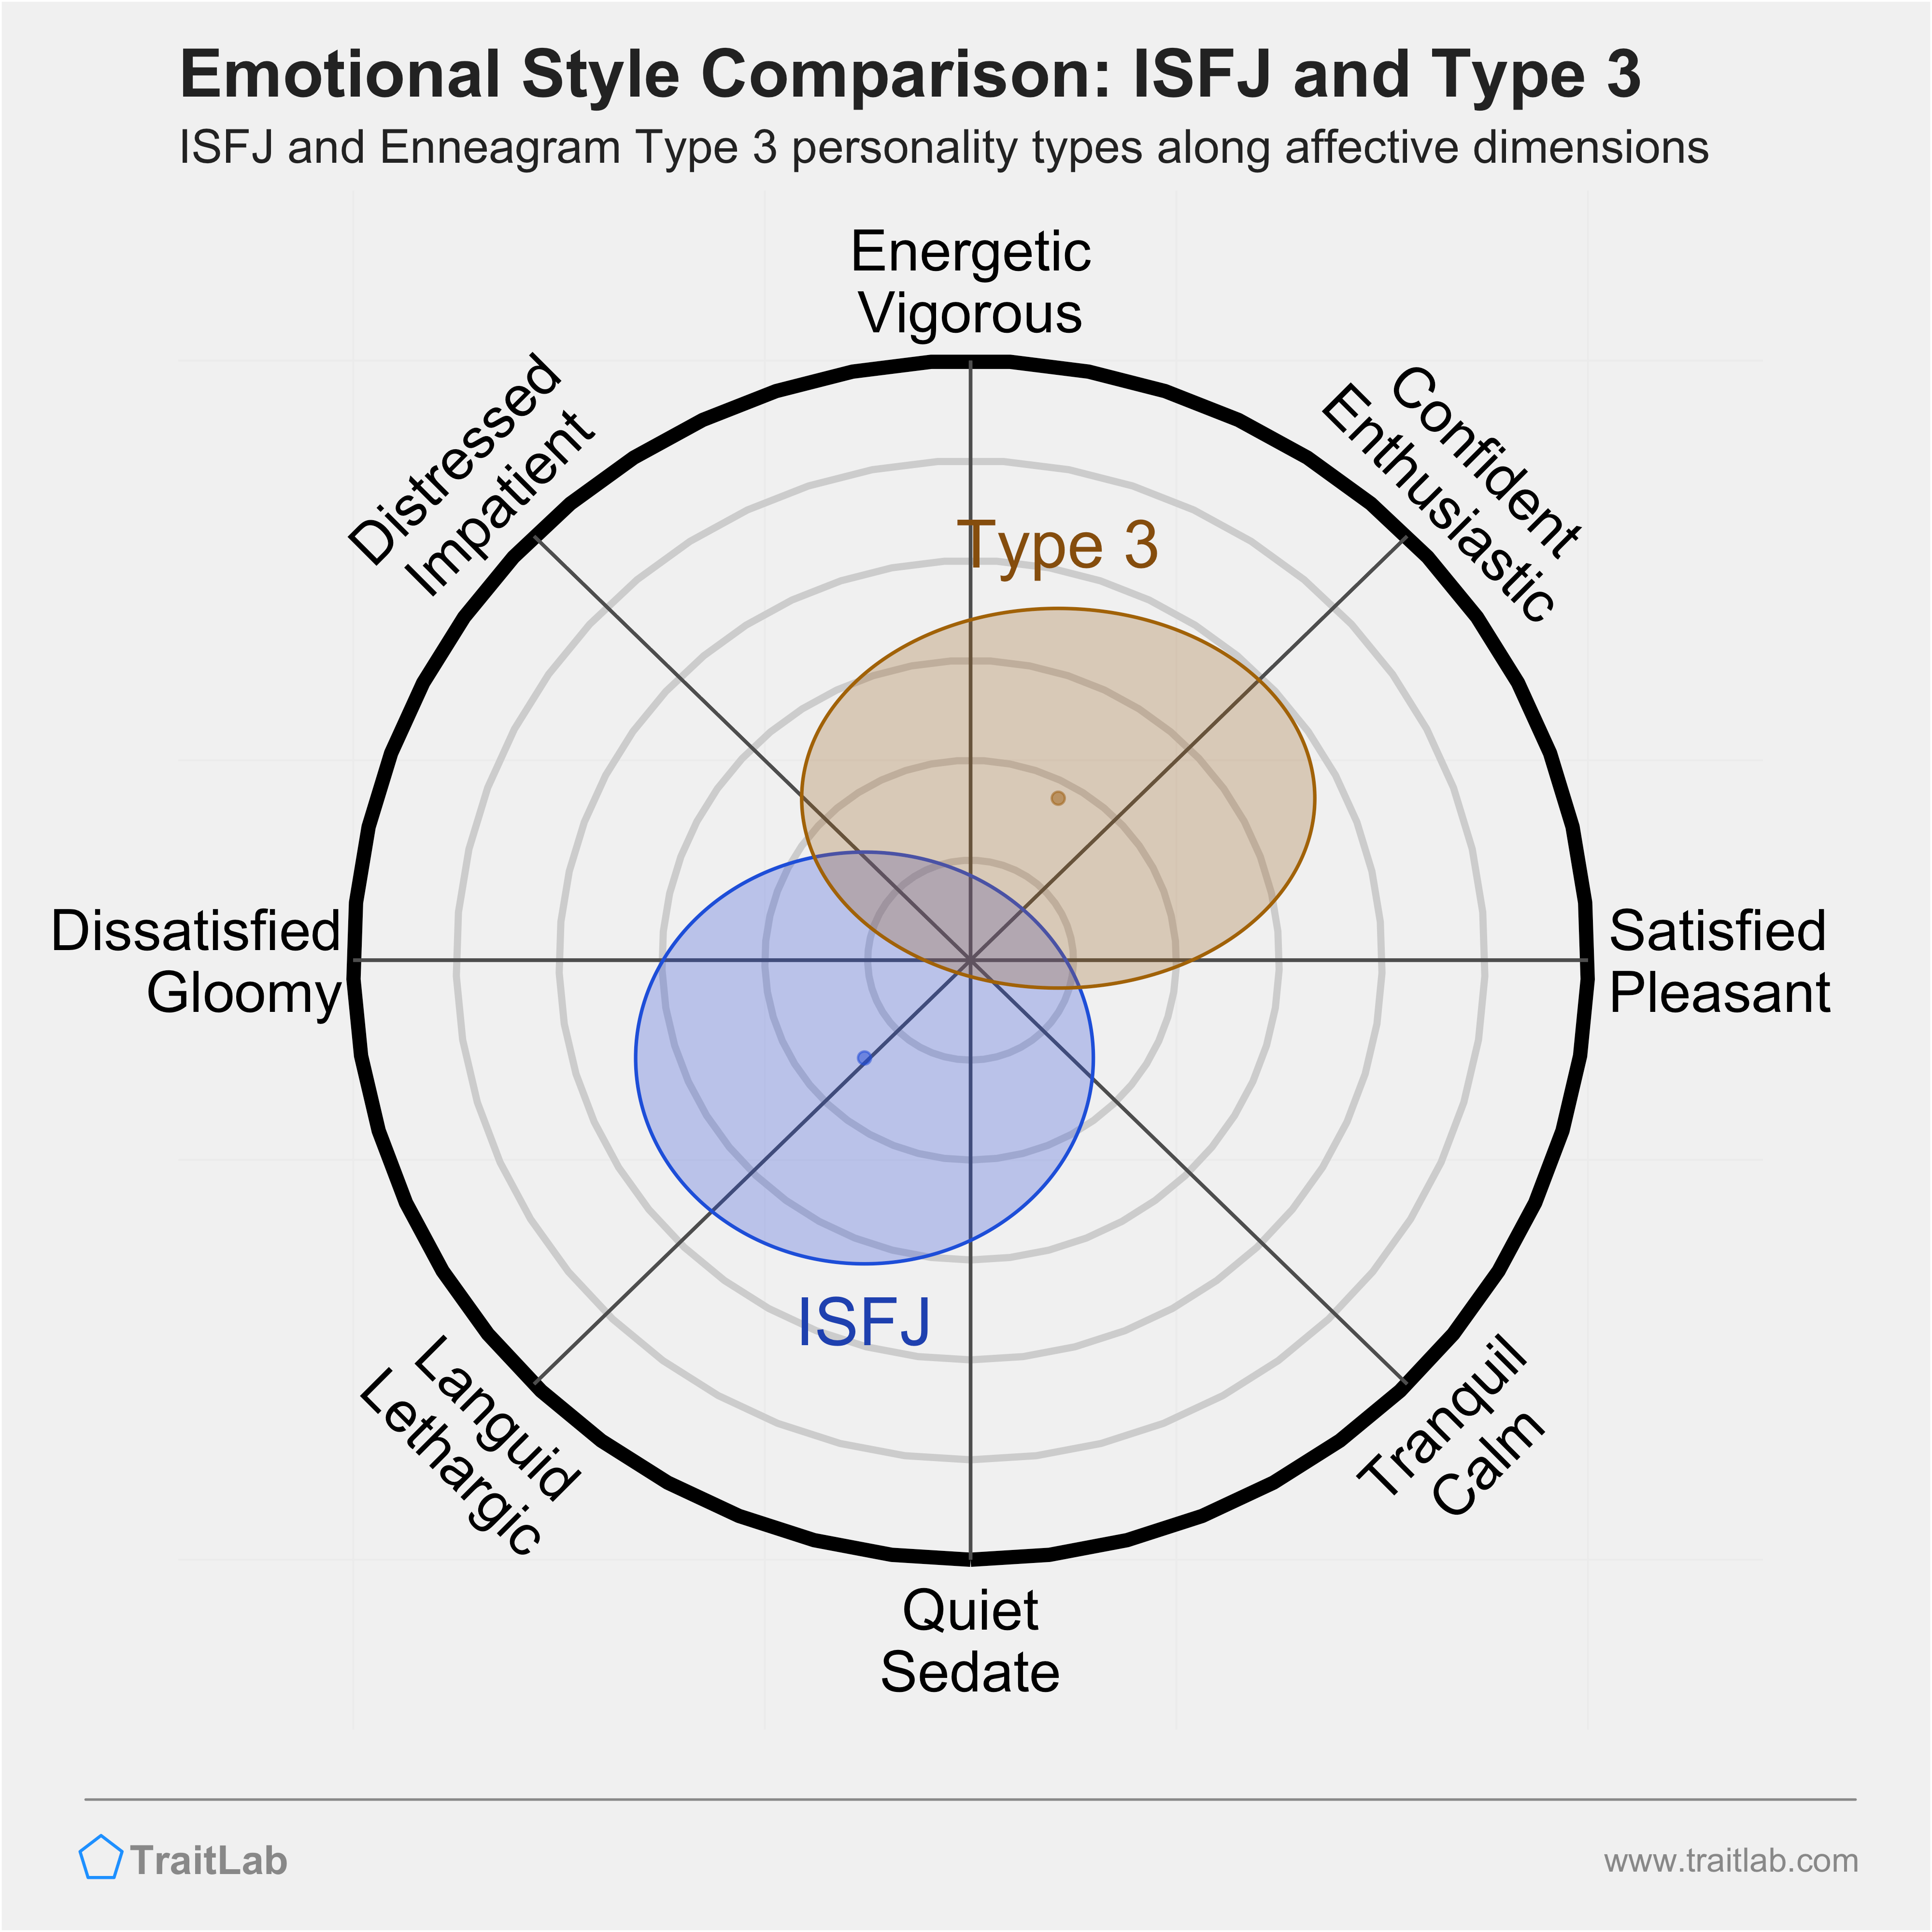 ISFJ and Type 3 comparison across emotional (affective) dimensions